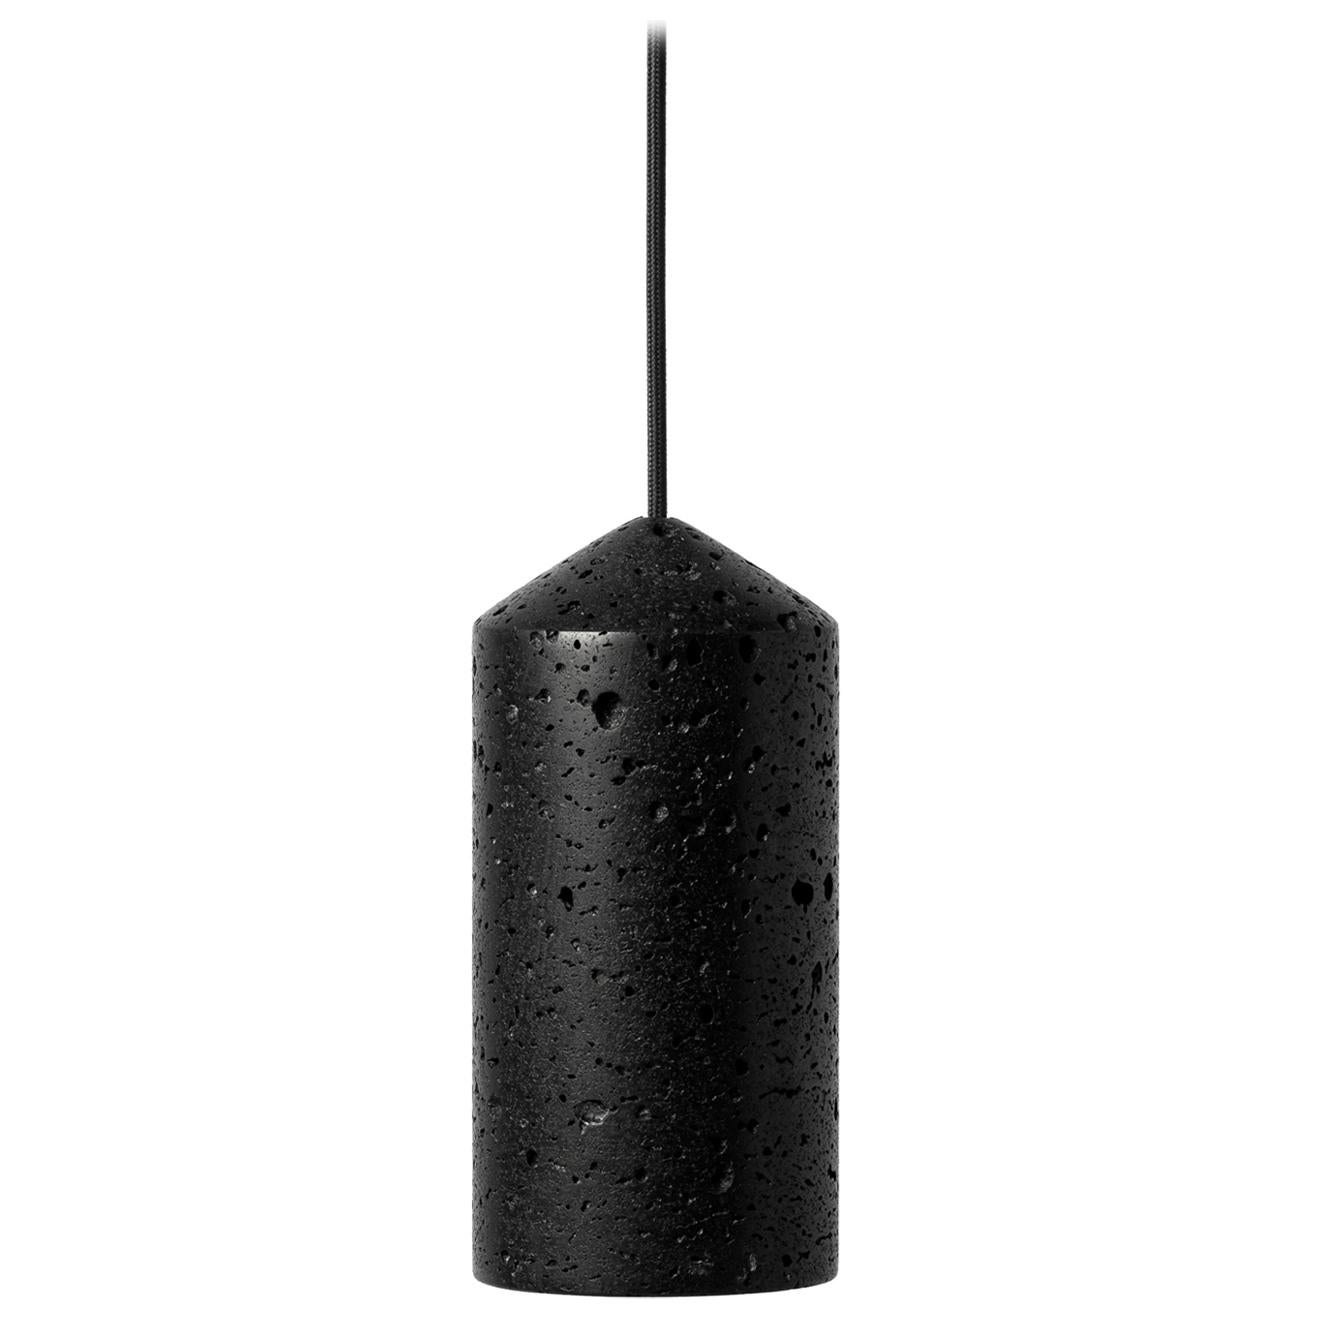 Lava Stone and Aluminum Pendant Light, “In, ” by Buzao